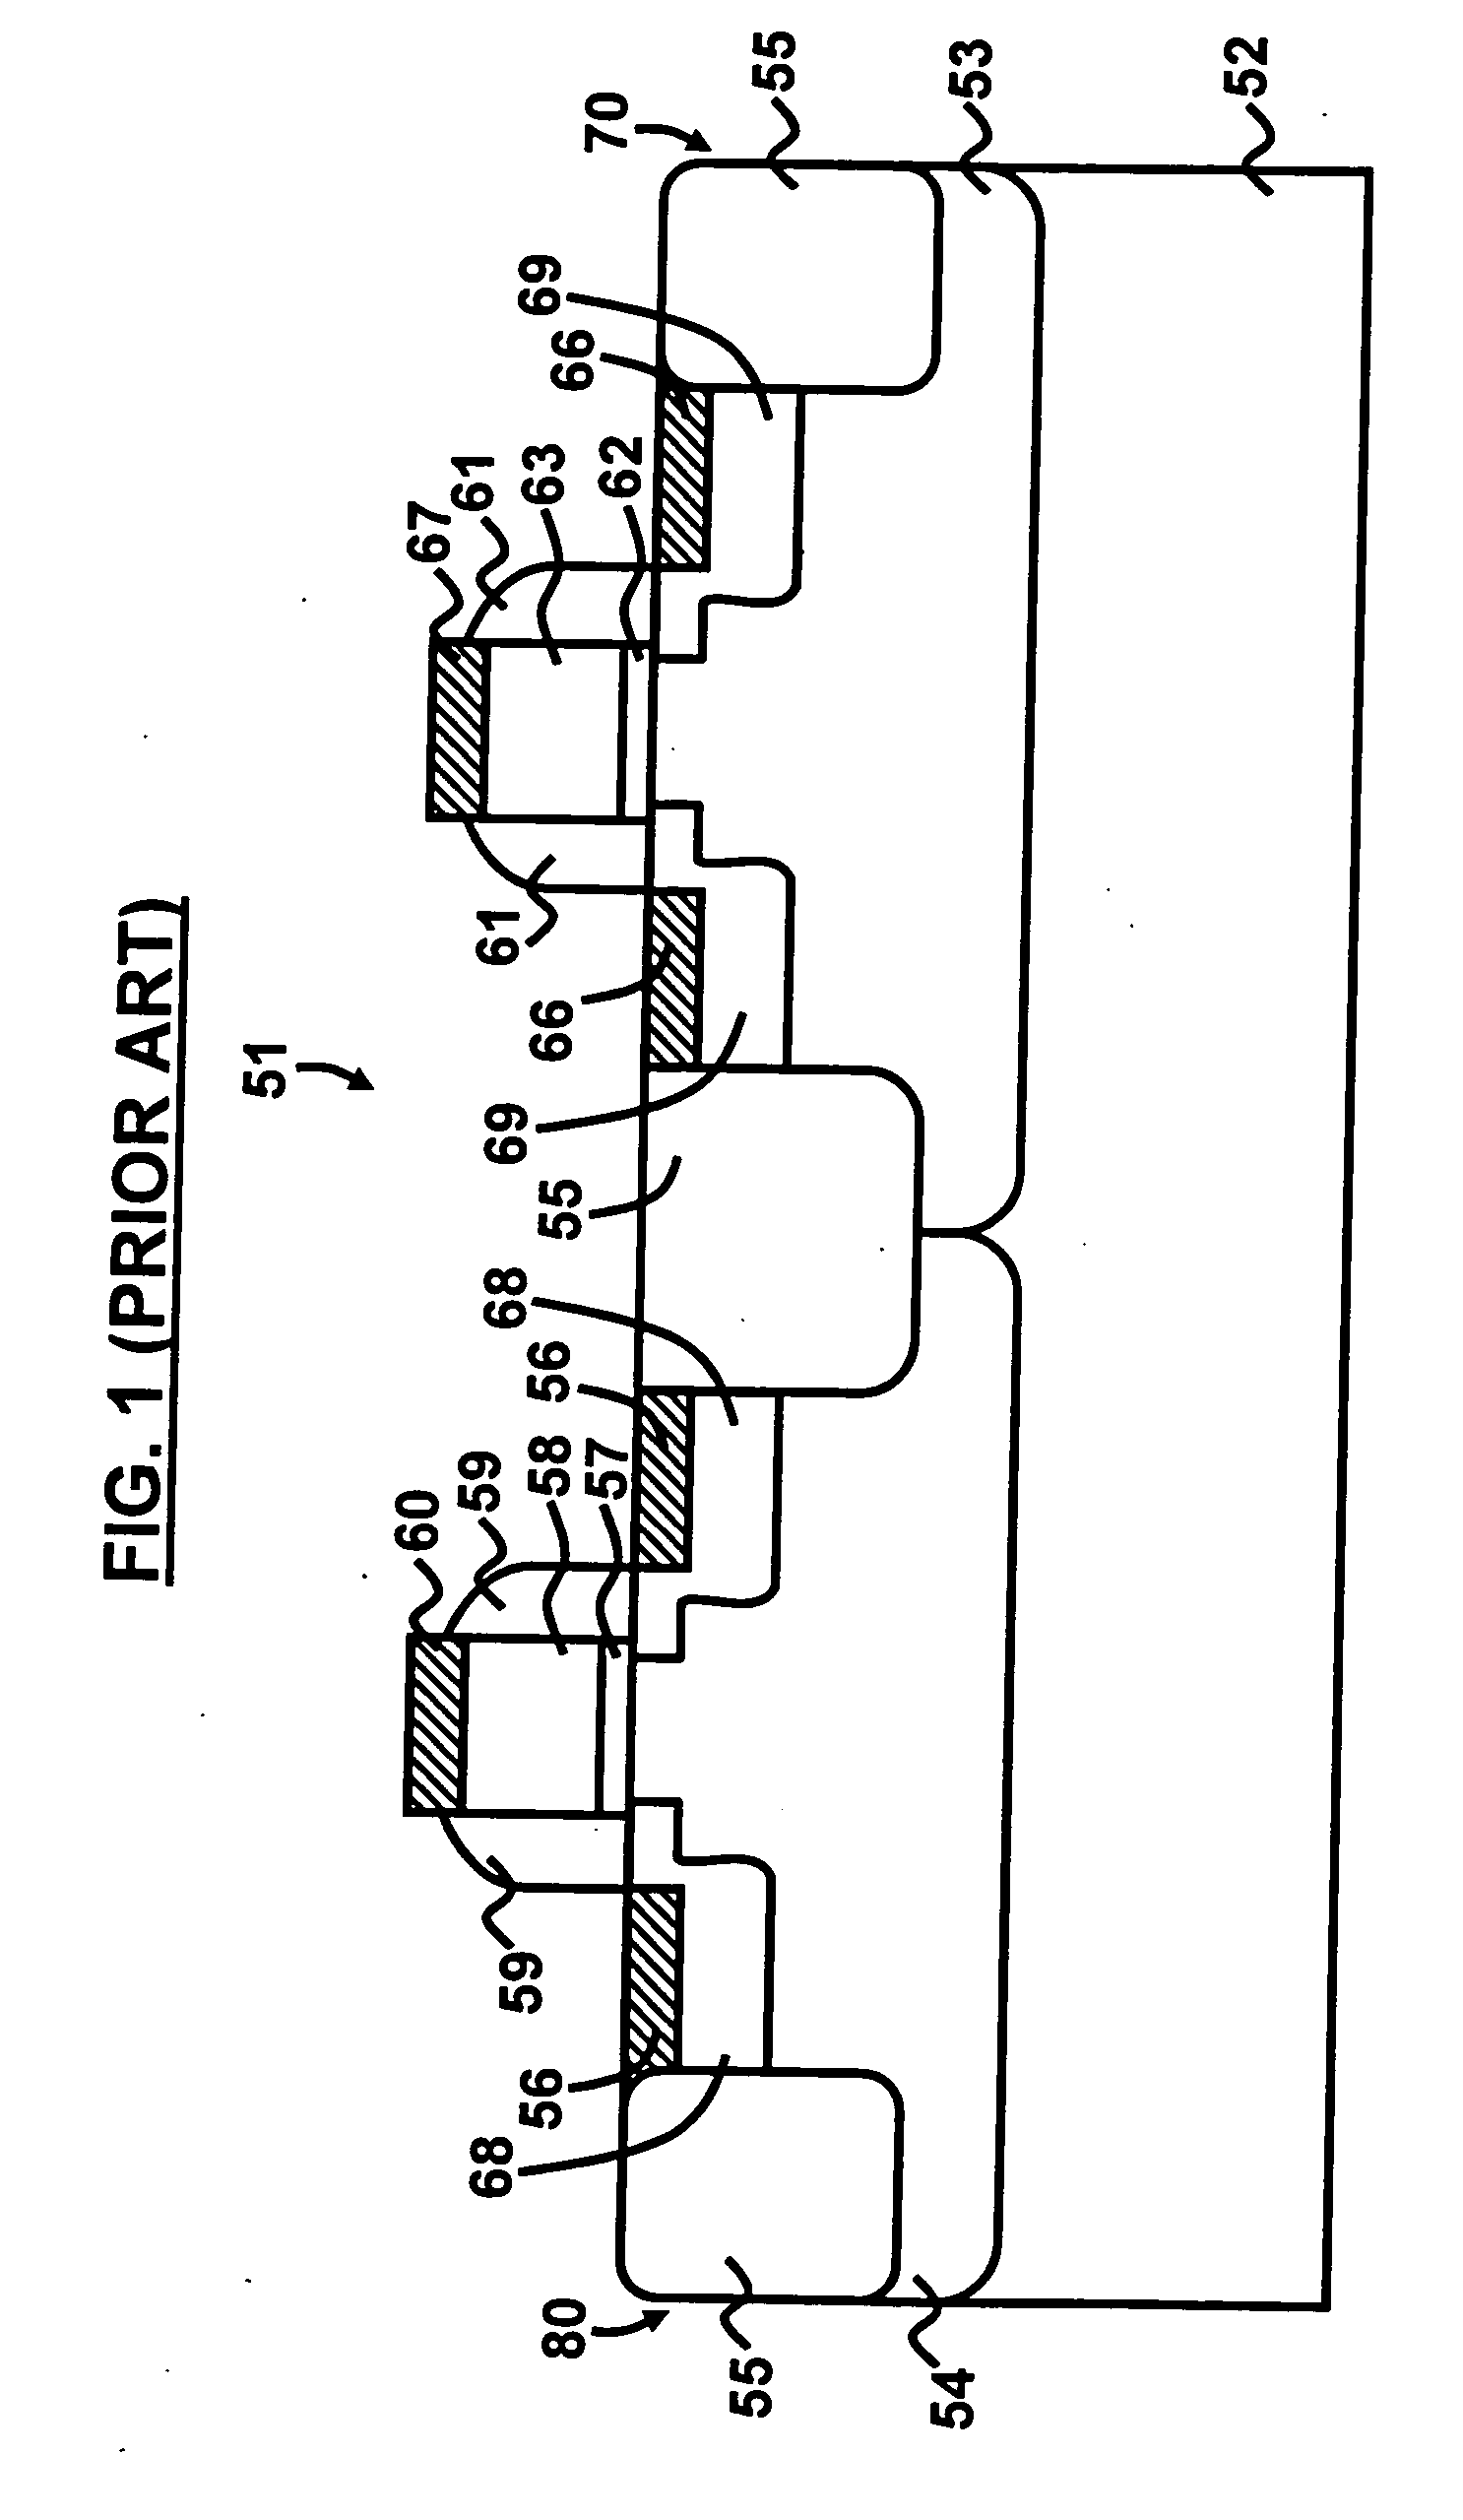 Method for forming self-aligned dual salicide in CMOS technologies